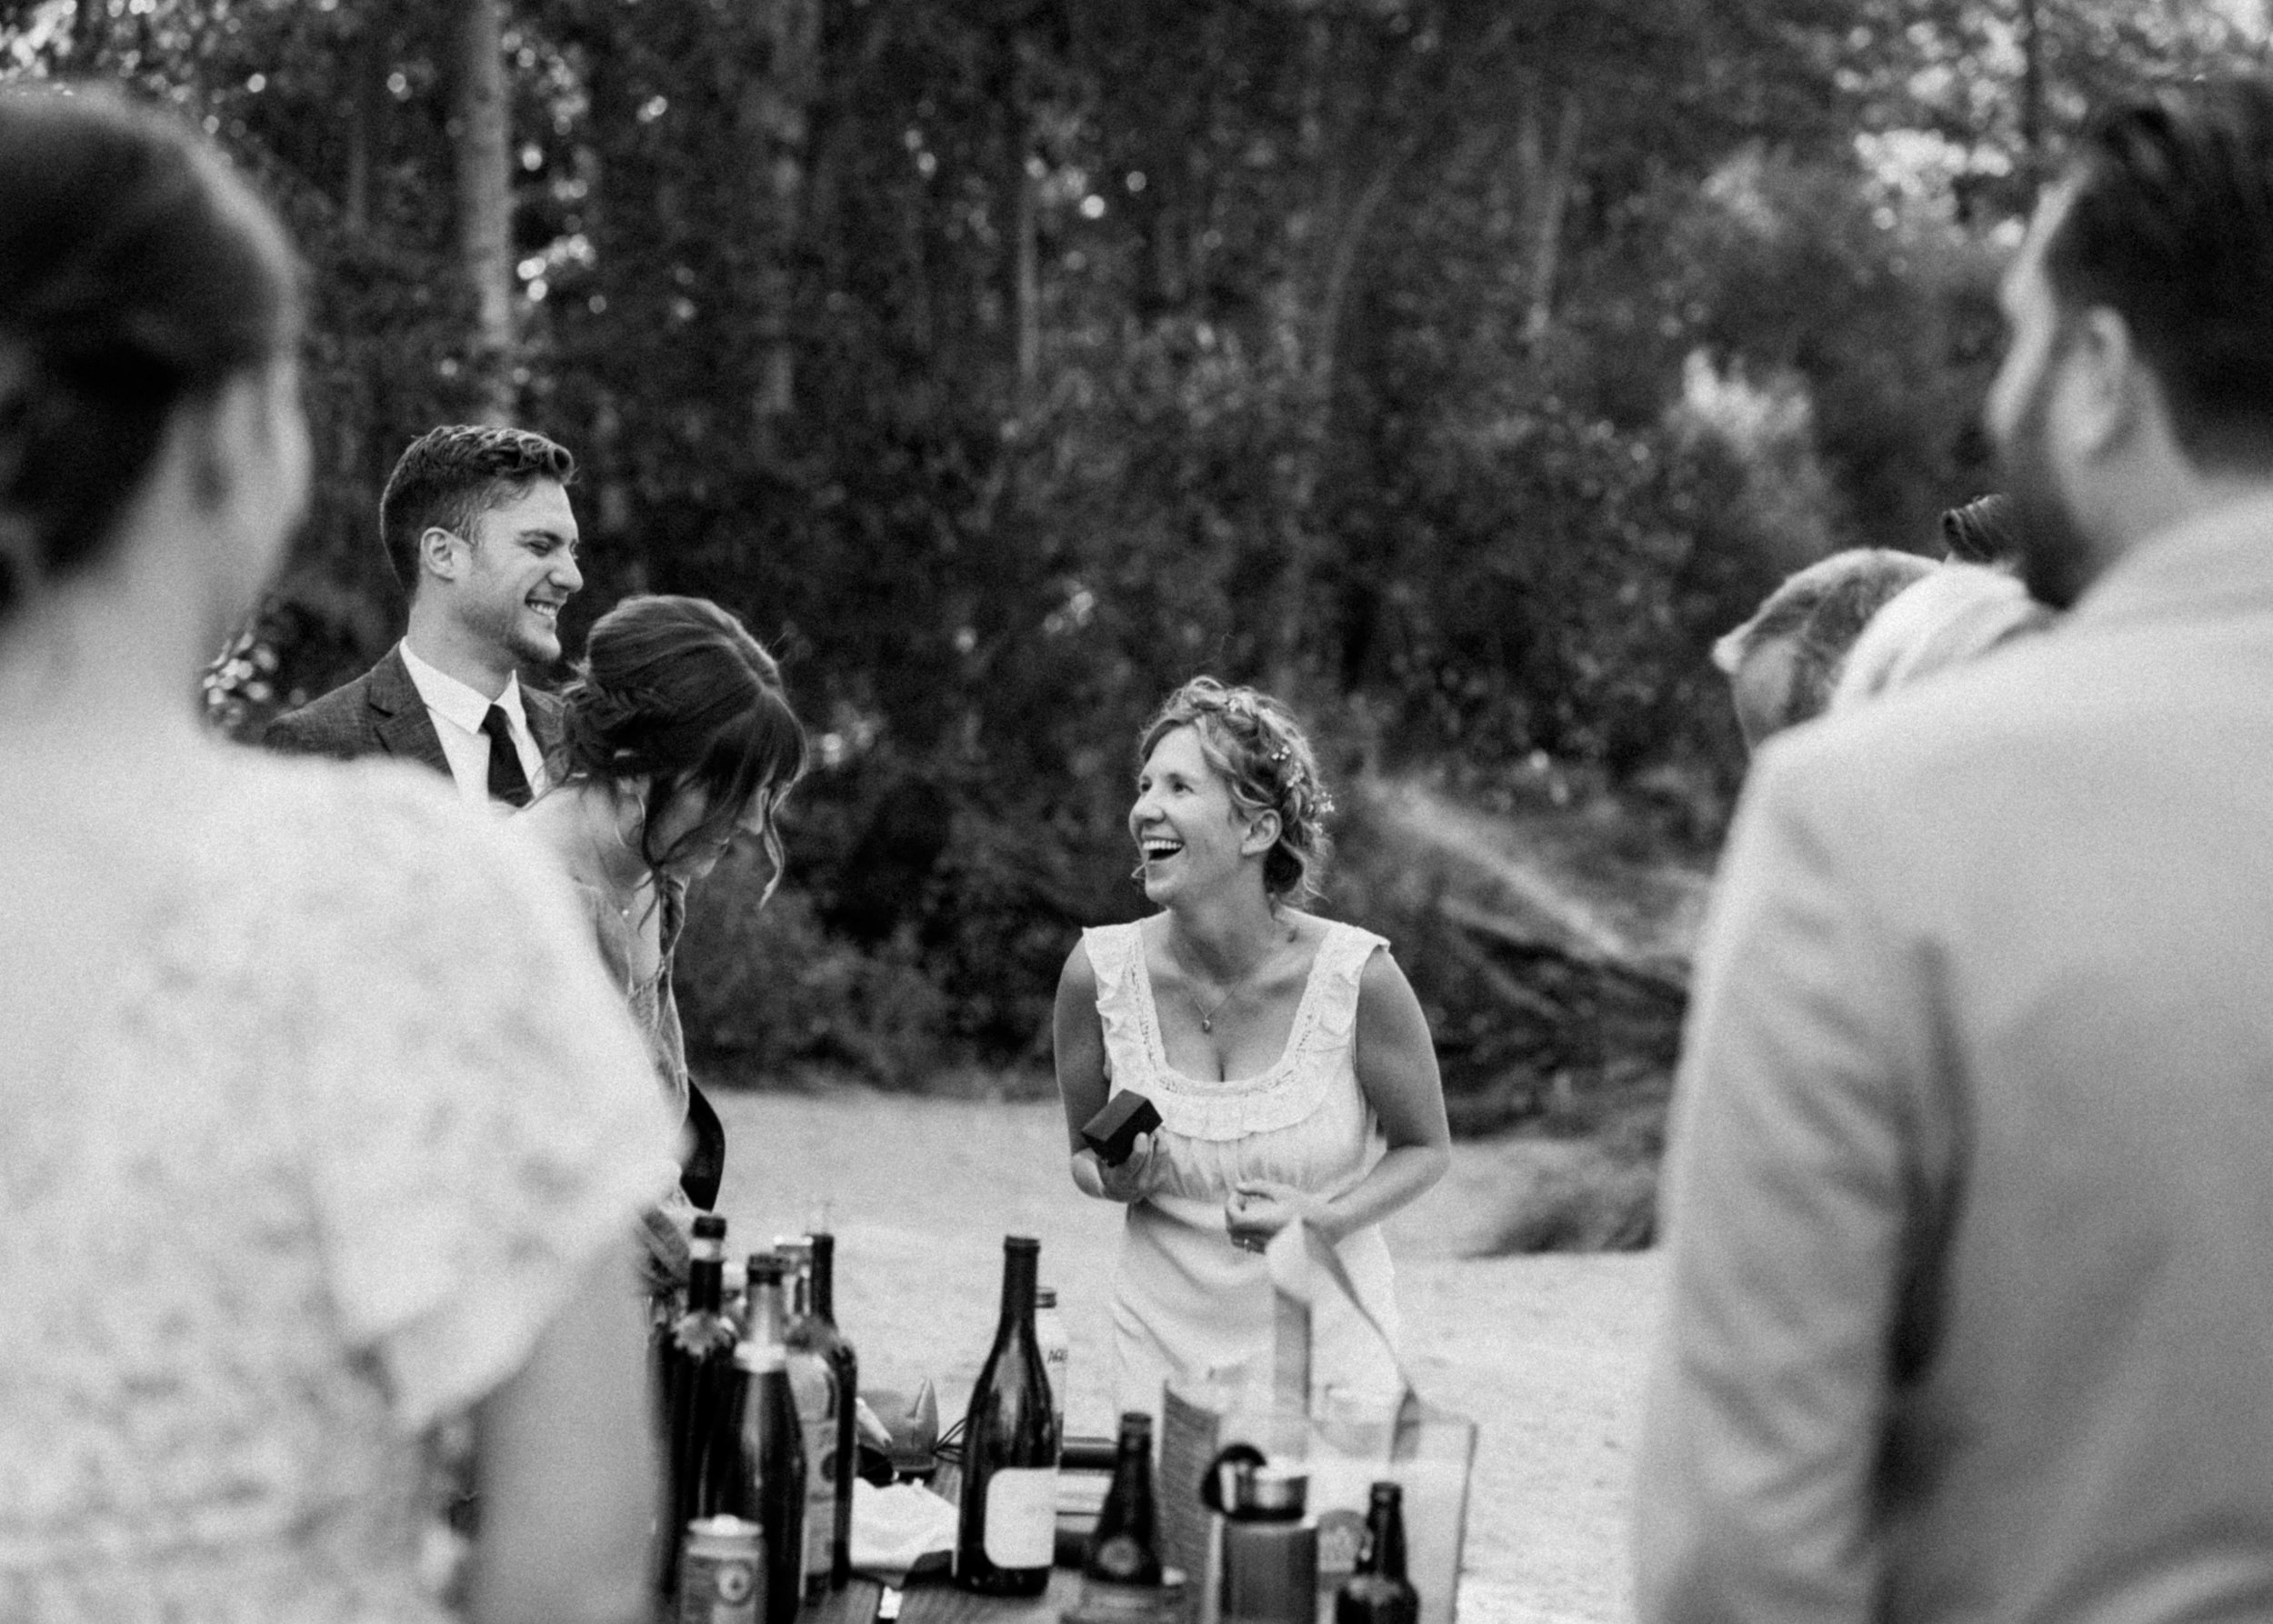 molly-dylan-yosemite-wedding-carrie-rogers-photography-447.jpg